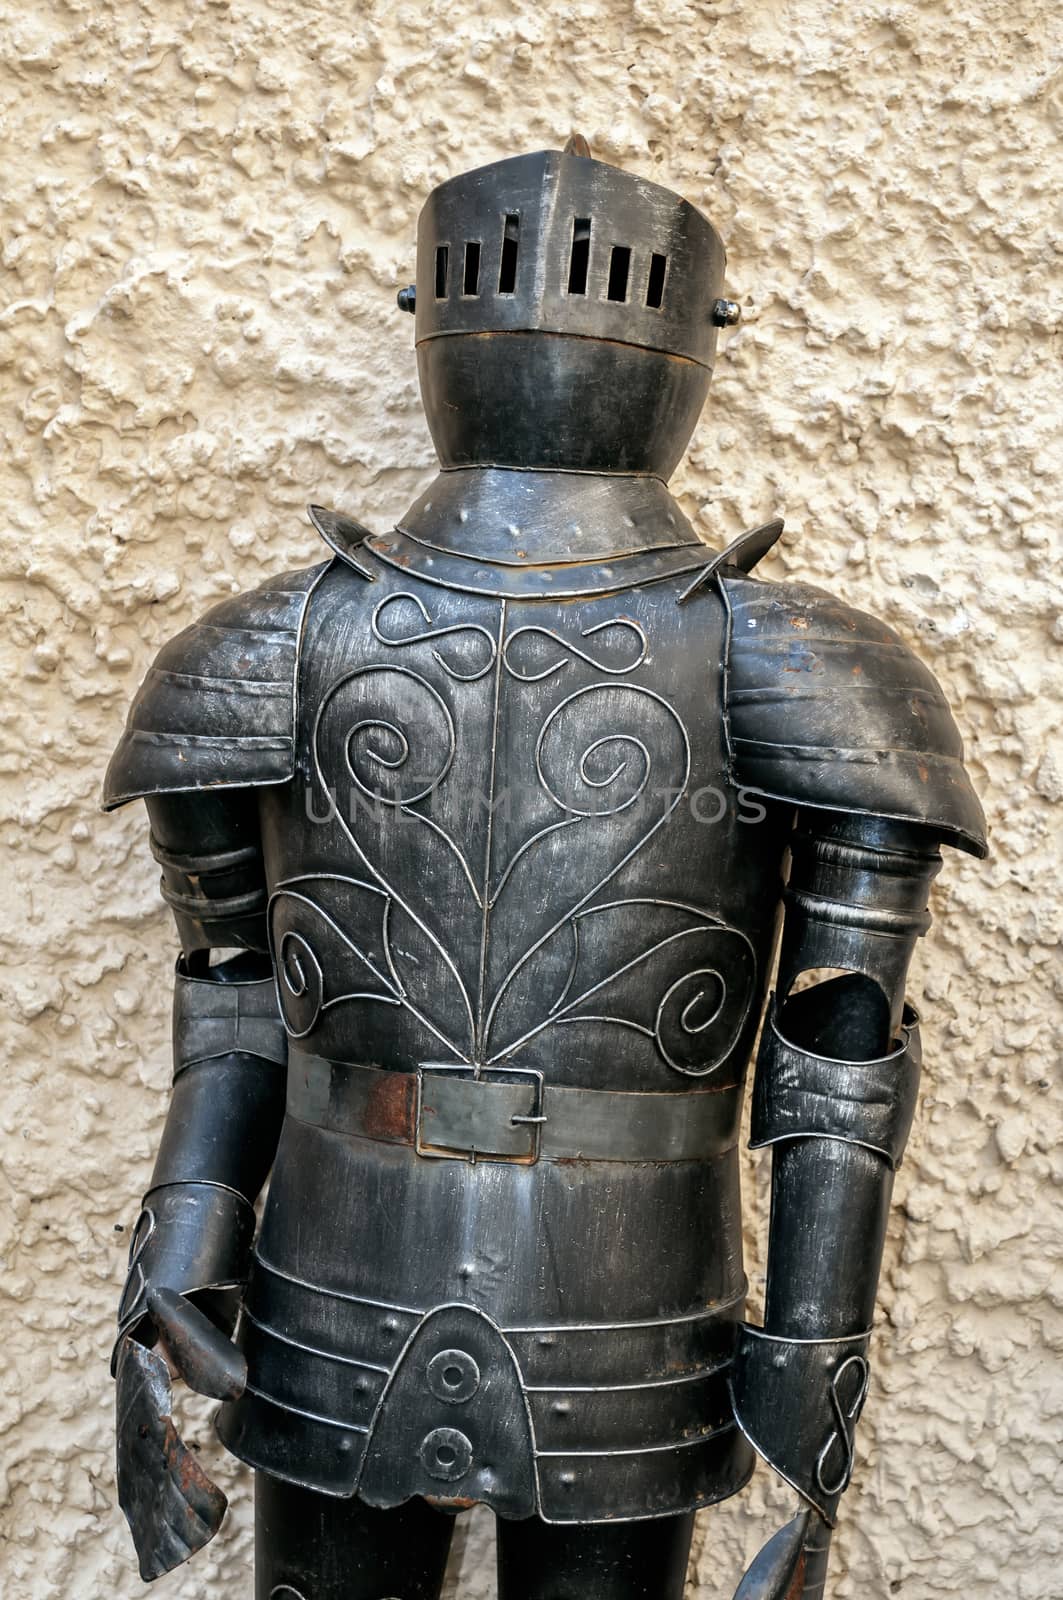 Knight armor at the medieval castle of Konopiste.